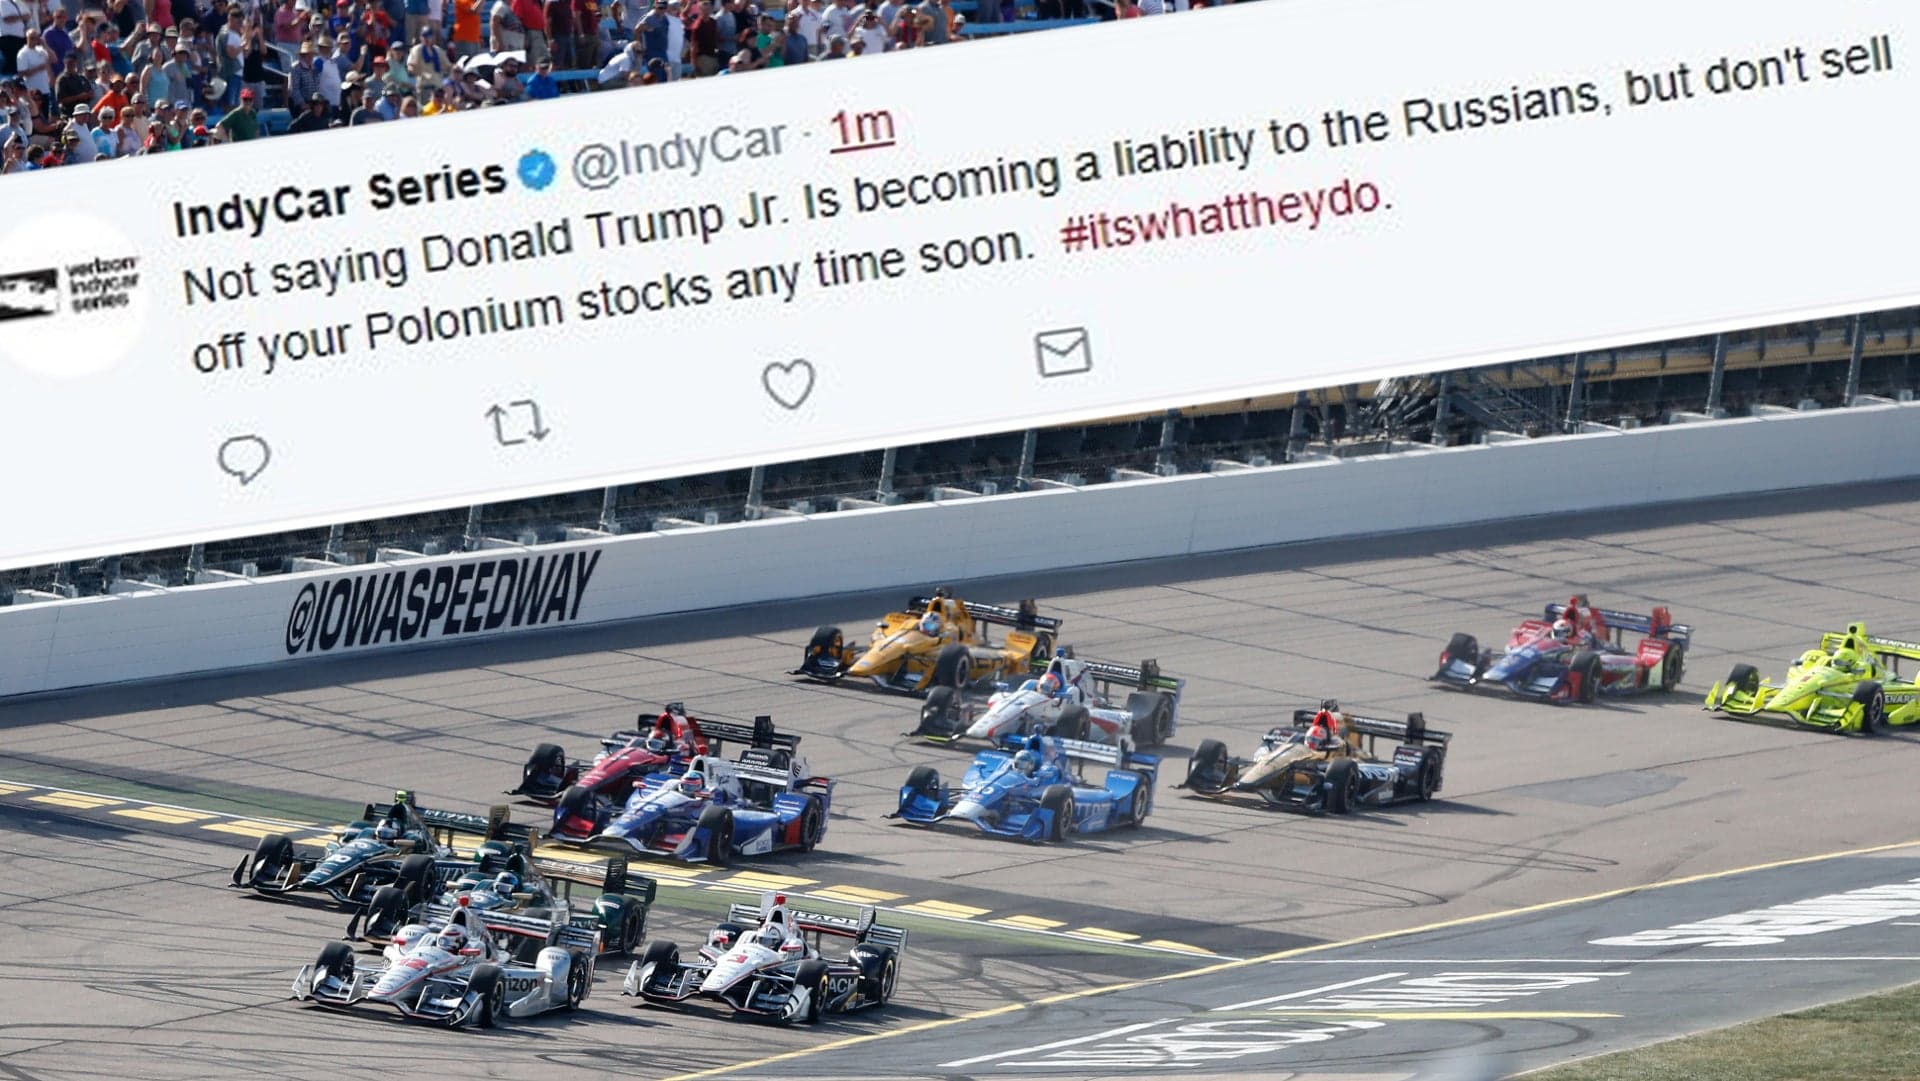 Someone Bashed Donald Trump Jr. From IndyCar’s Official Twitter Account